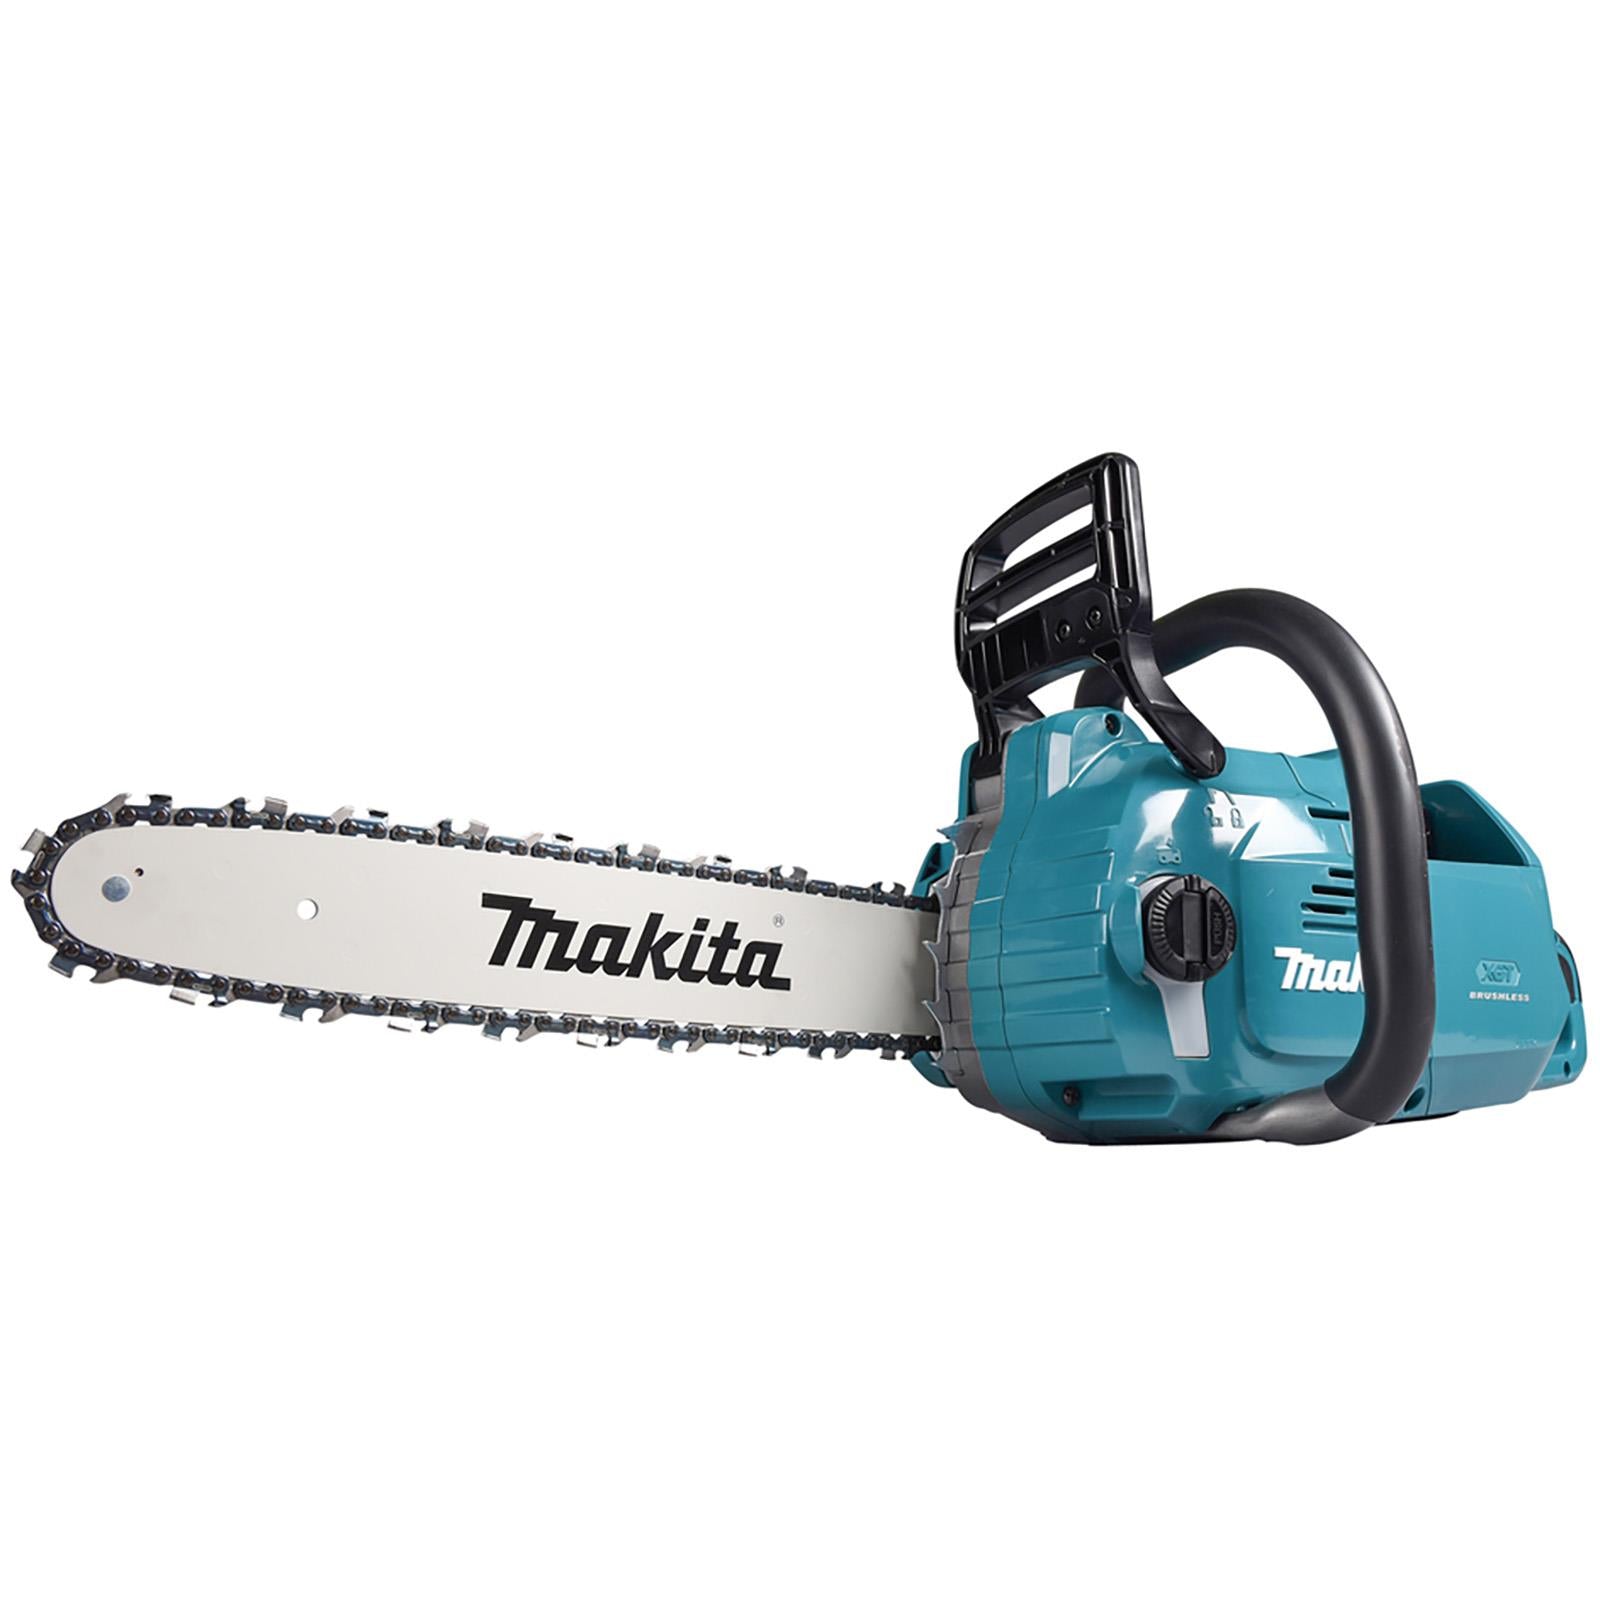 Makita Chainsaw Heavy Duty 35cm 14" 40V XGT Brushless Cordless Garden Tree Cutting Pruning Bare Unit Body Only UC015GZ